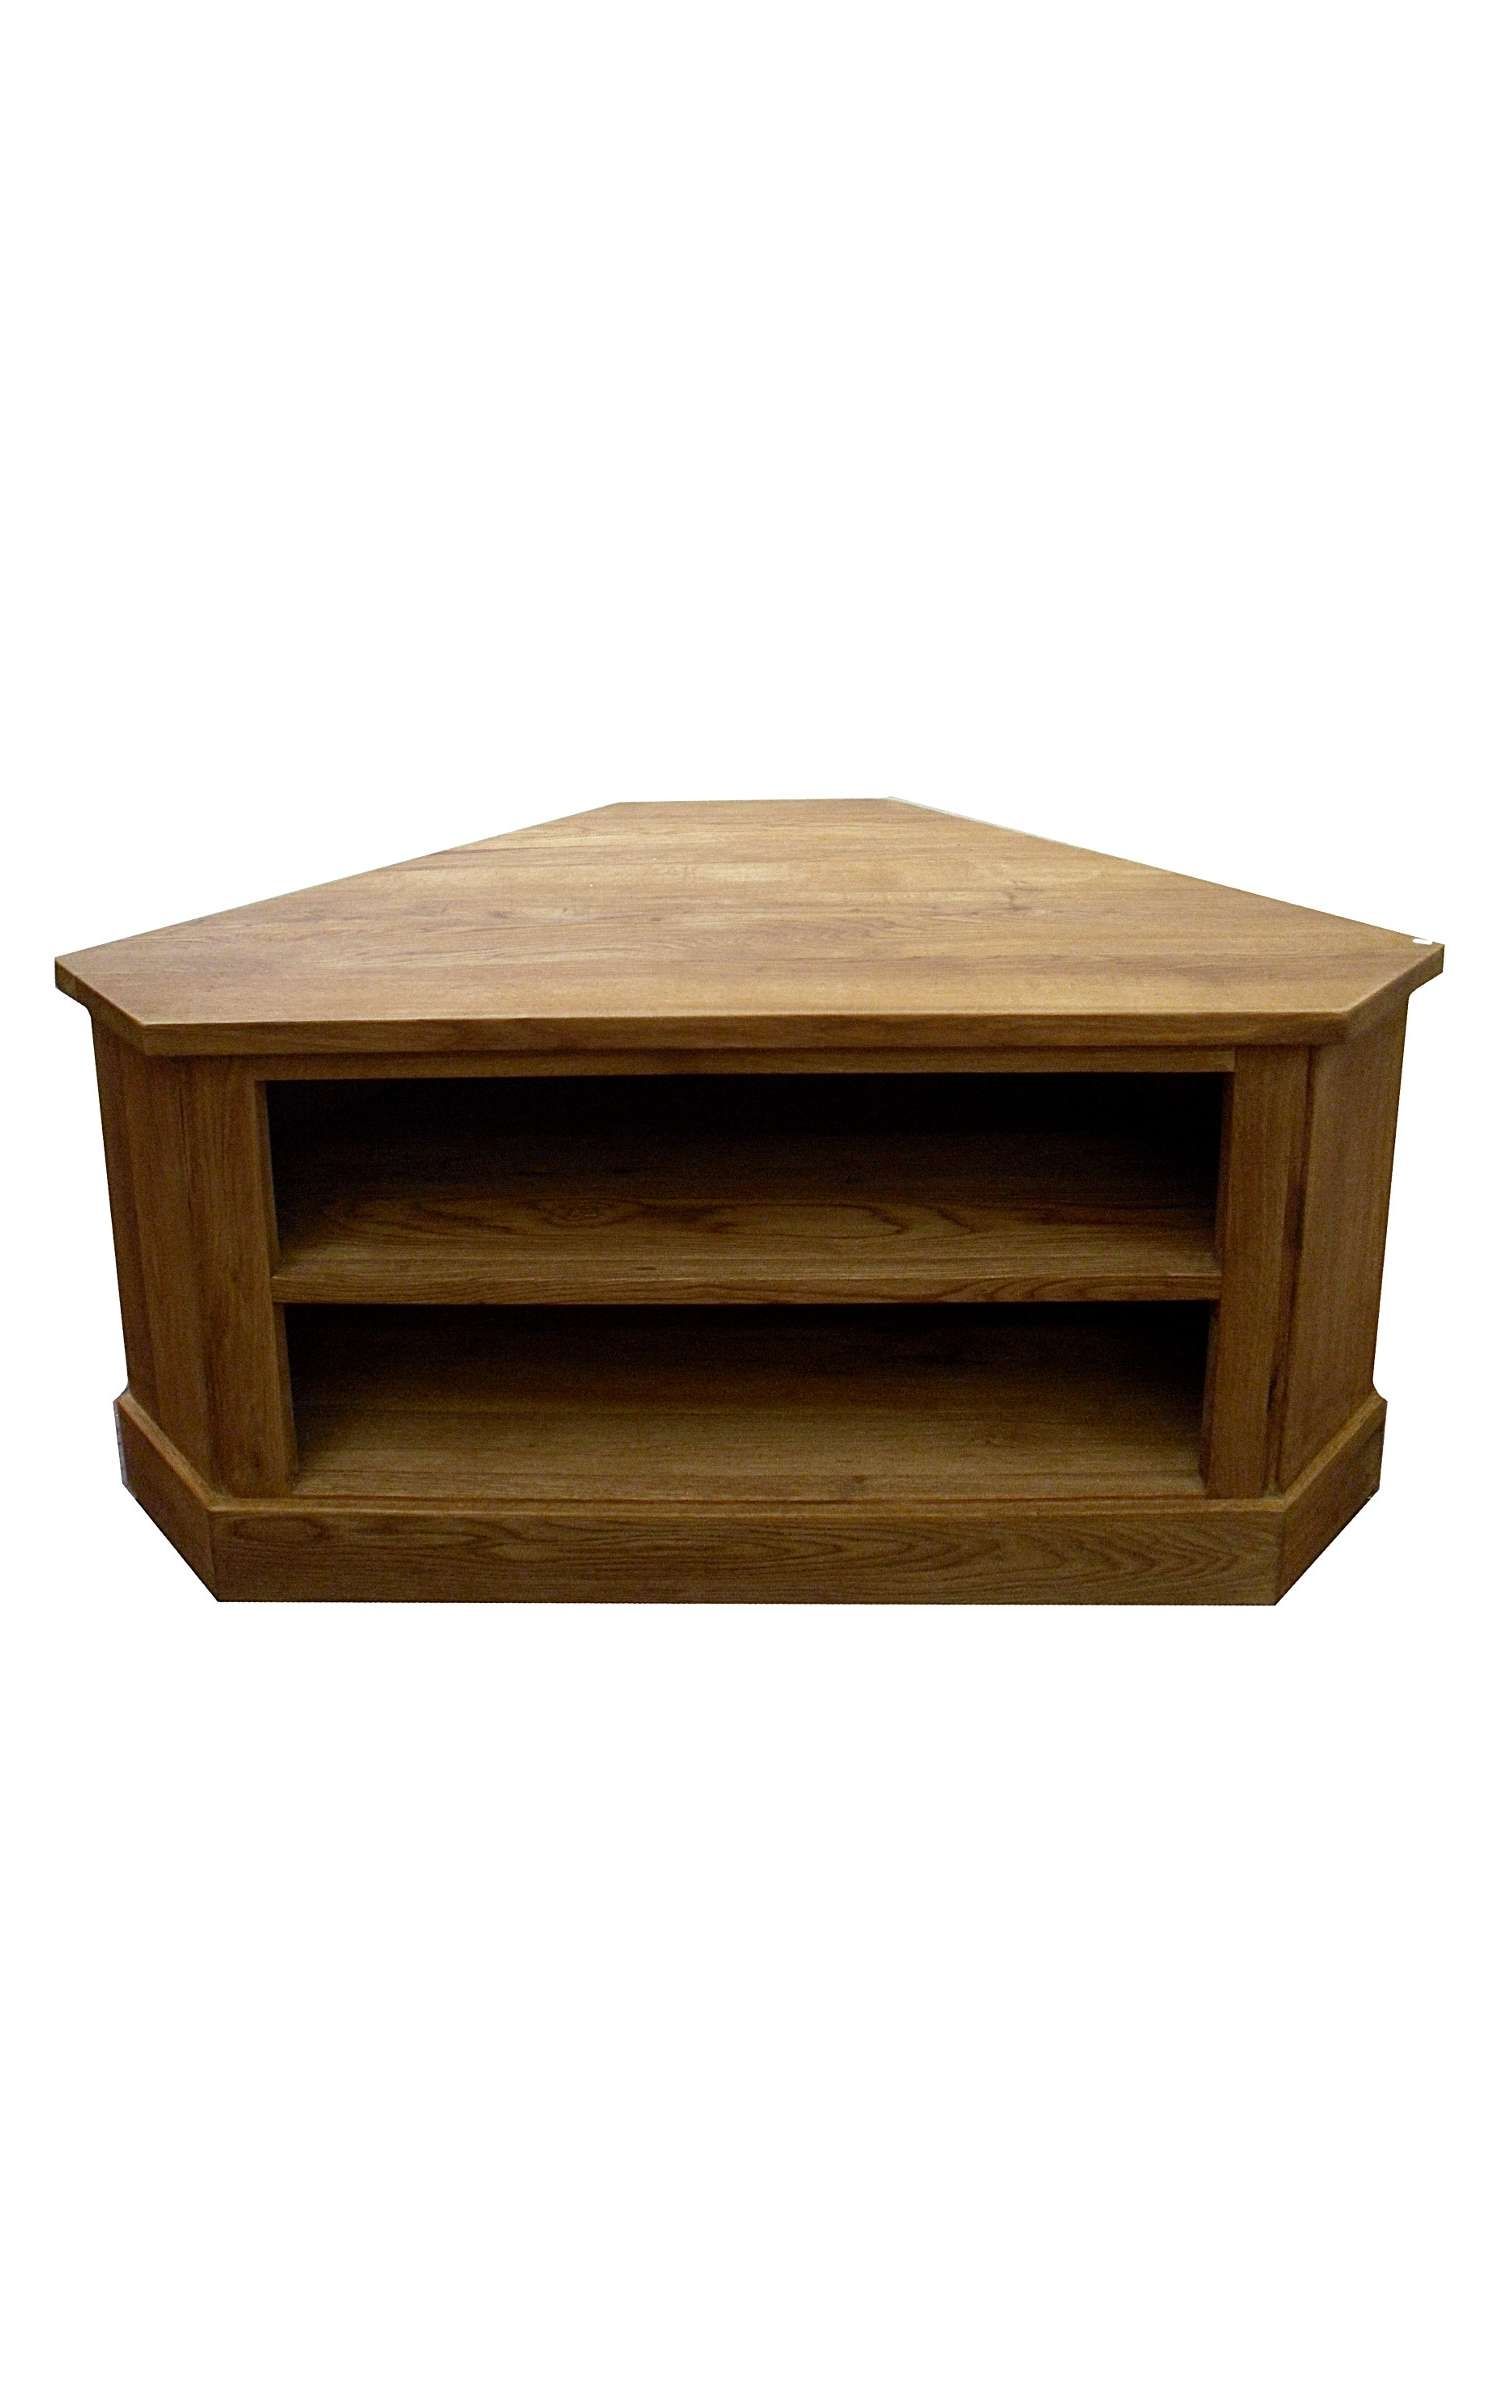 Small Wooden Corner Tv Stand Console Cabinet With Fireplace And Inside Small Oak Corner Tv Stands (Gallery 3 of 15)